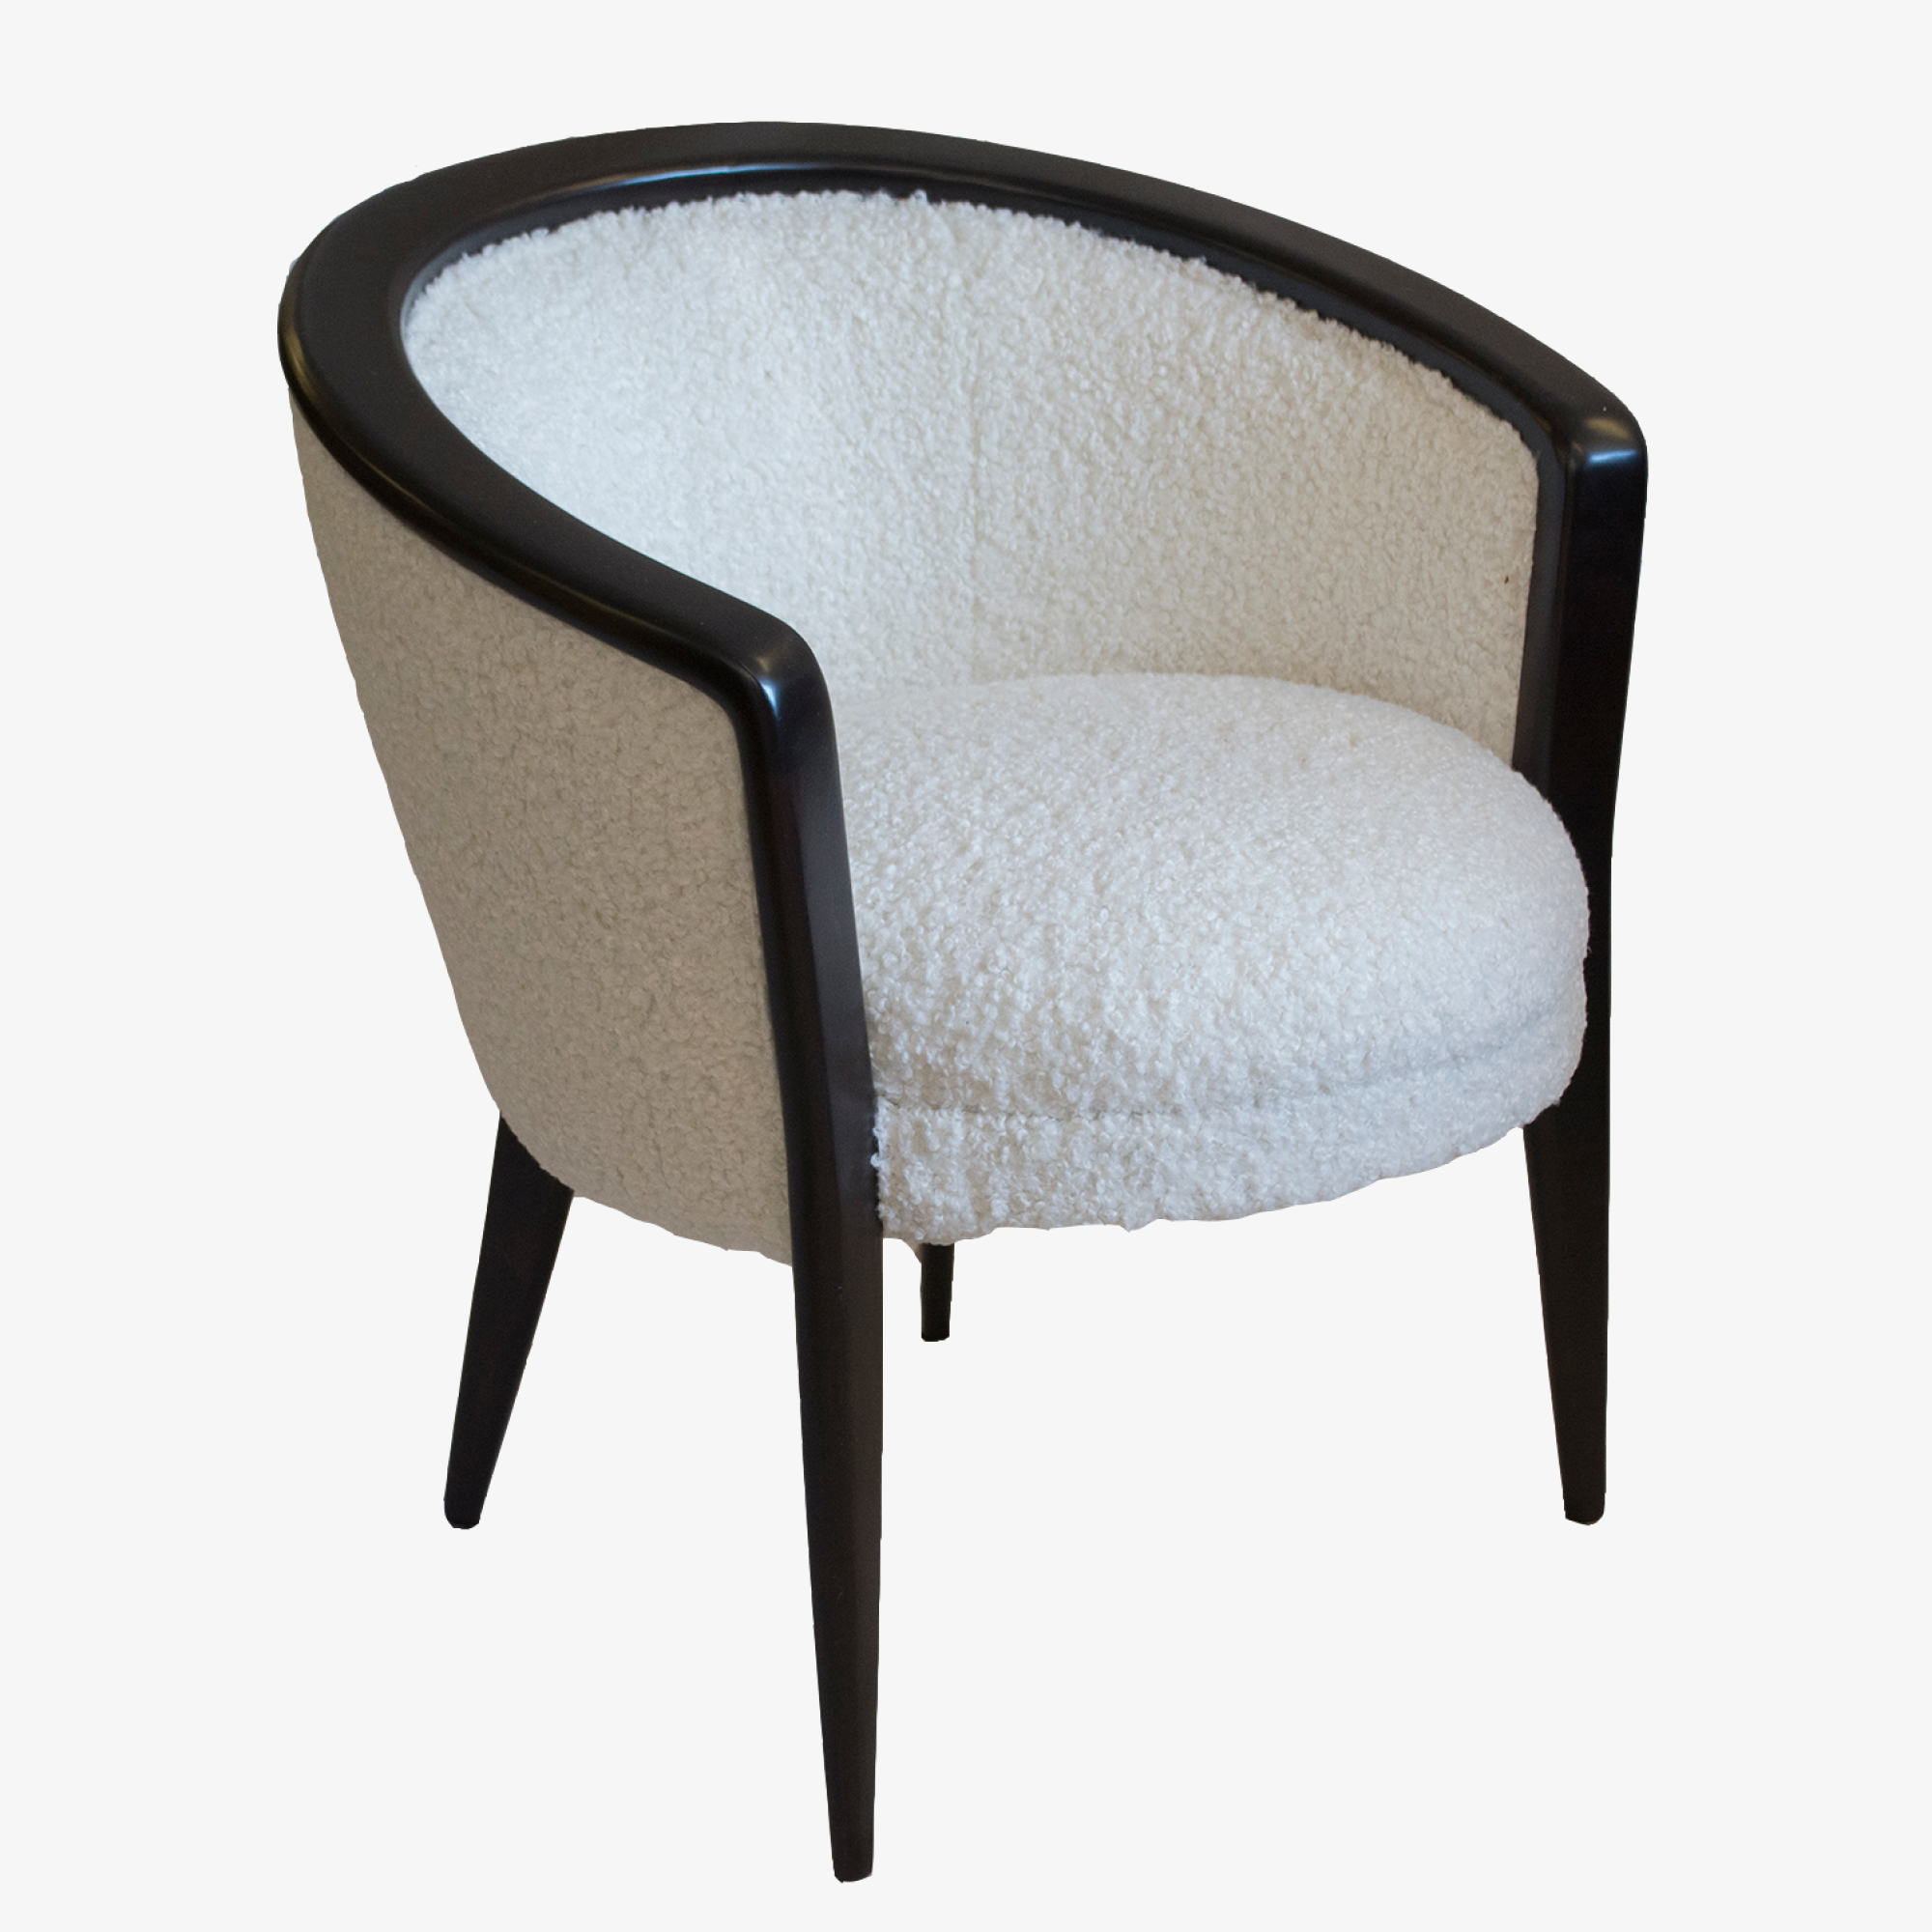 Bespoke French Barrel Chairs in Faux Shearling 1.png